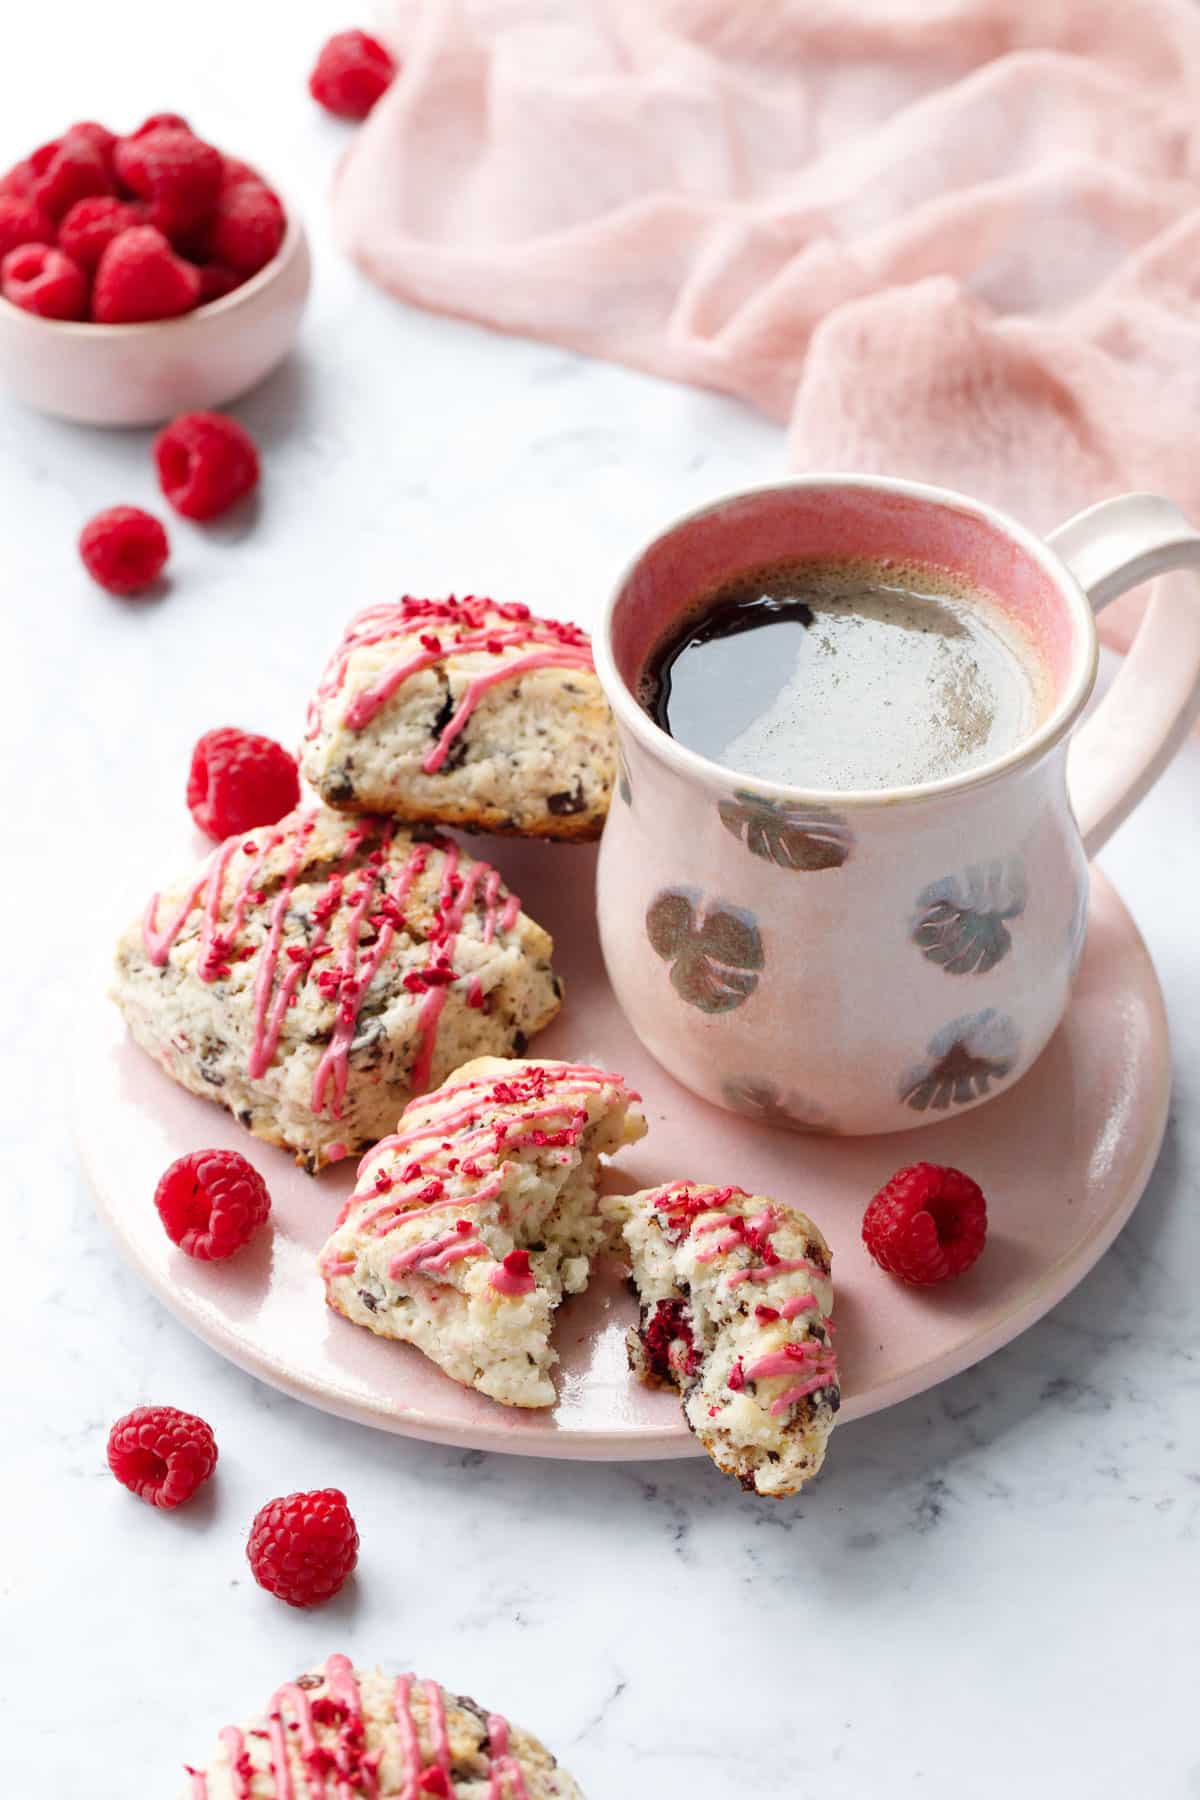 Dark Chocolate Raspberry Cream Scones on a pink serving plate with fresh raspberries and a ceramic mug of coffee, pink napkin and bowl of raspberries in the background.